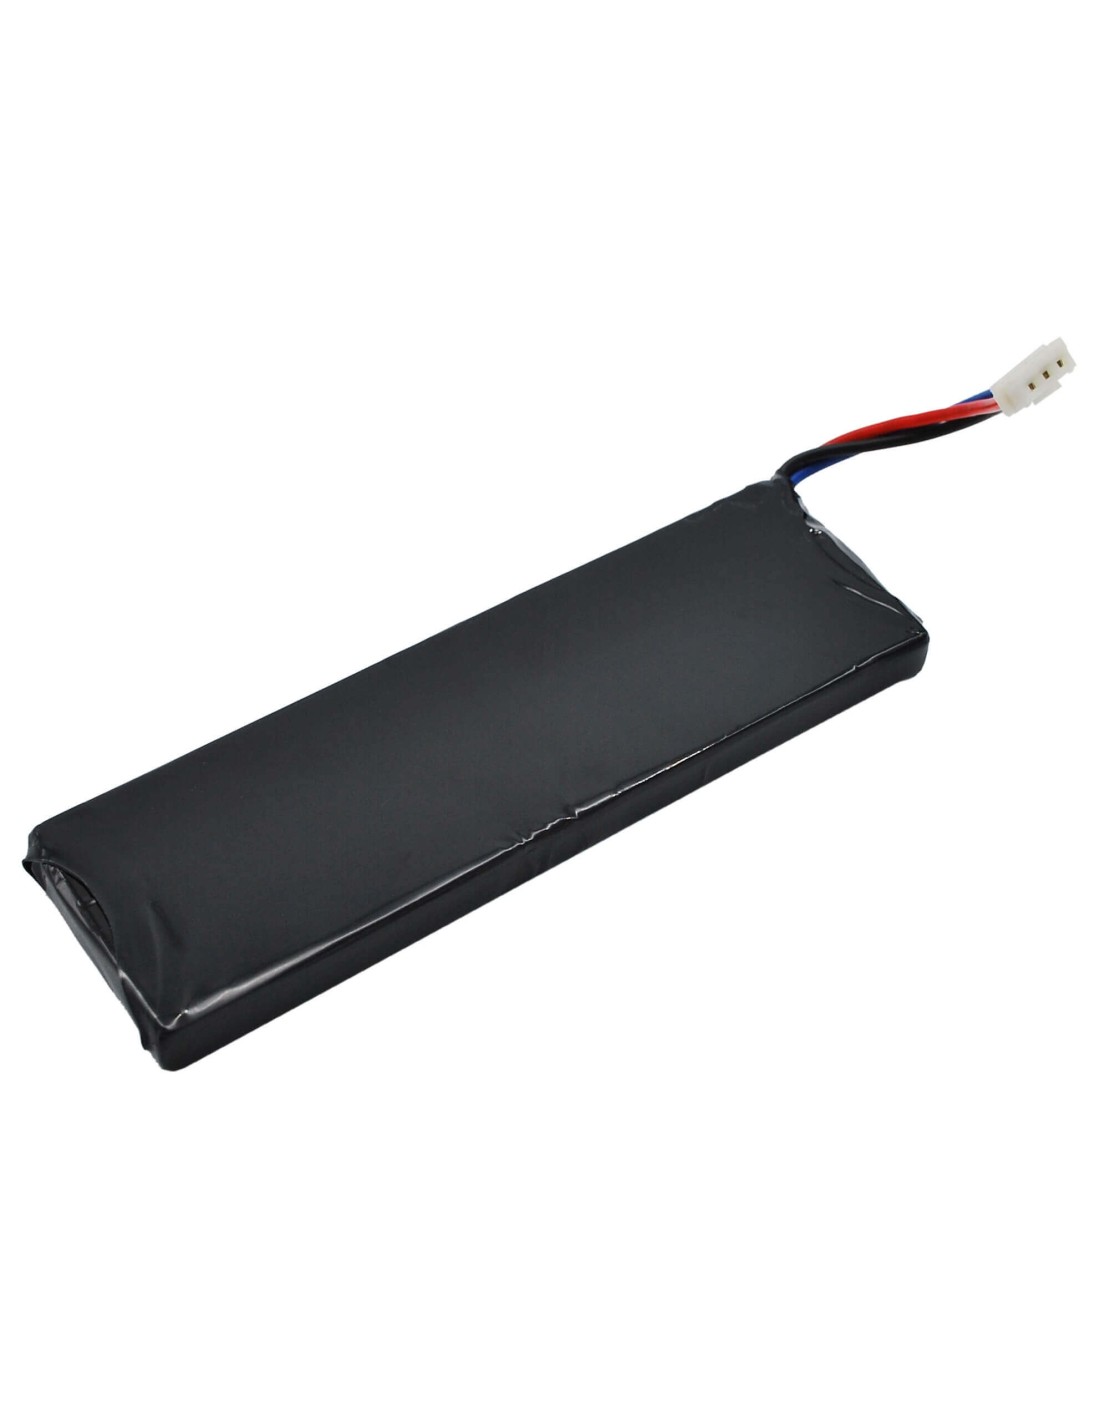 Battery for Sonstige X Drive Mp3 Player 7.4V, 800mAh - 5.92Wh